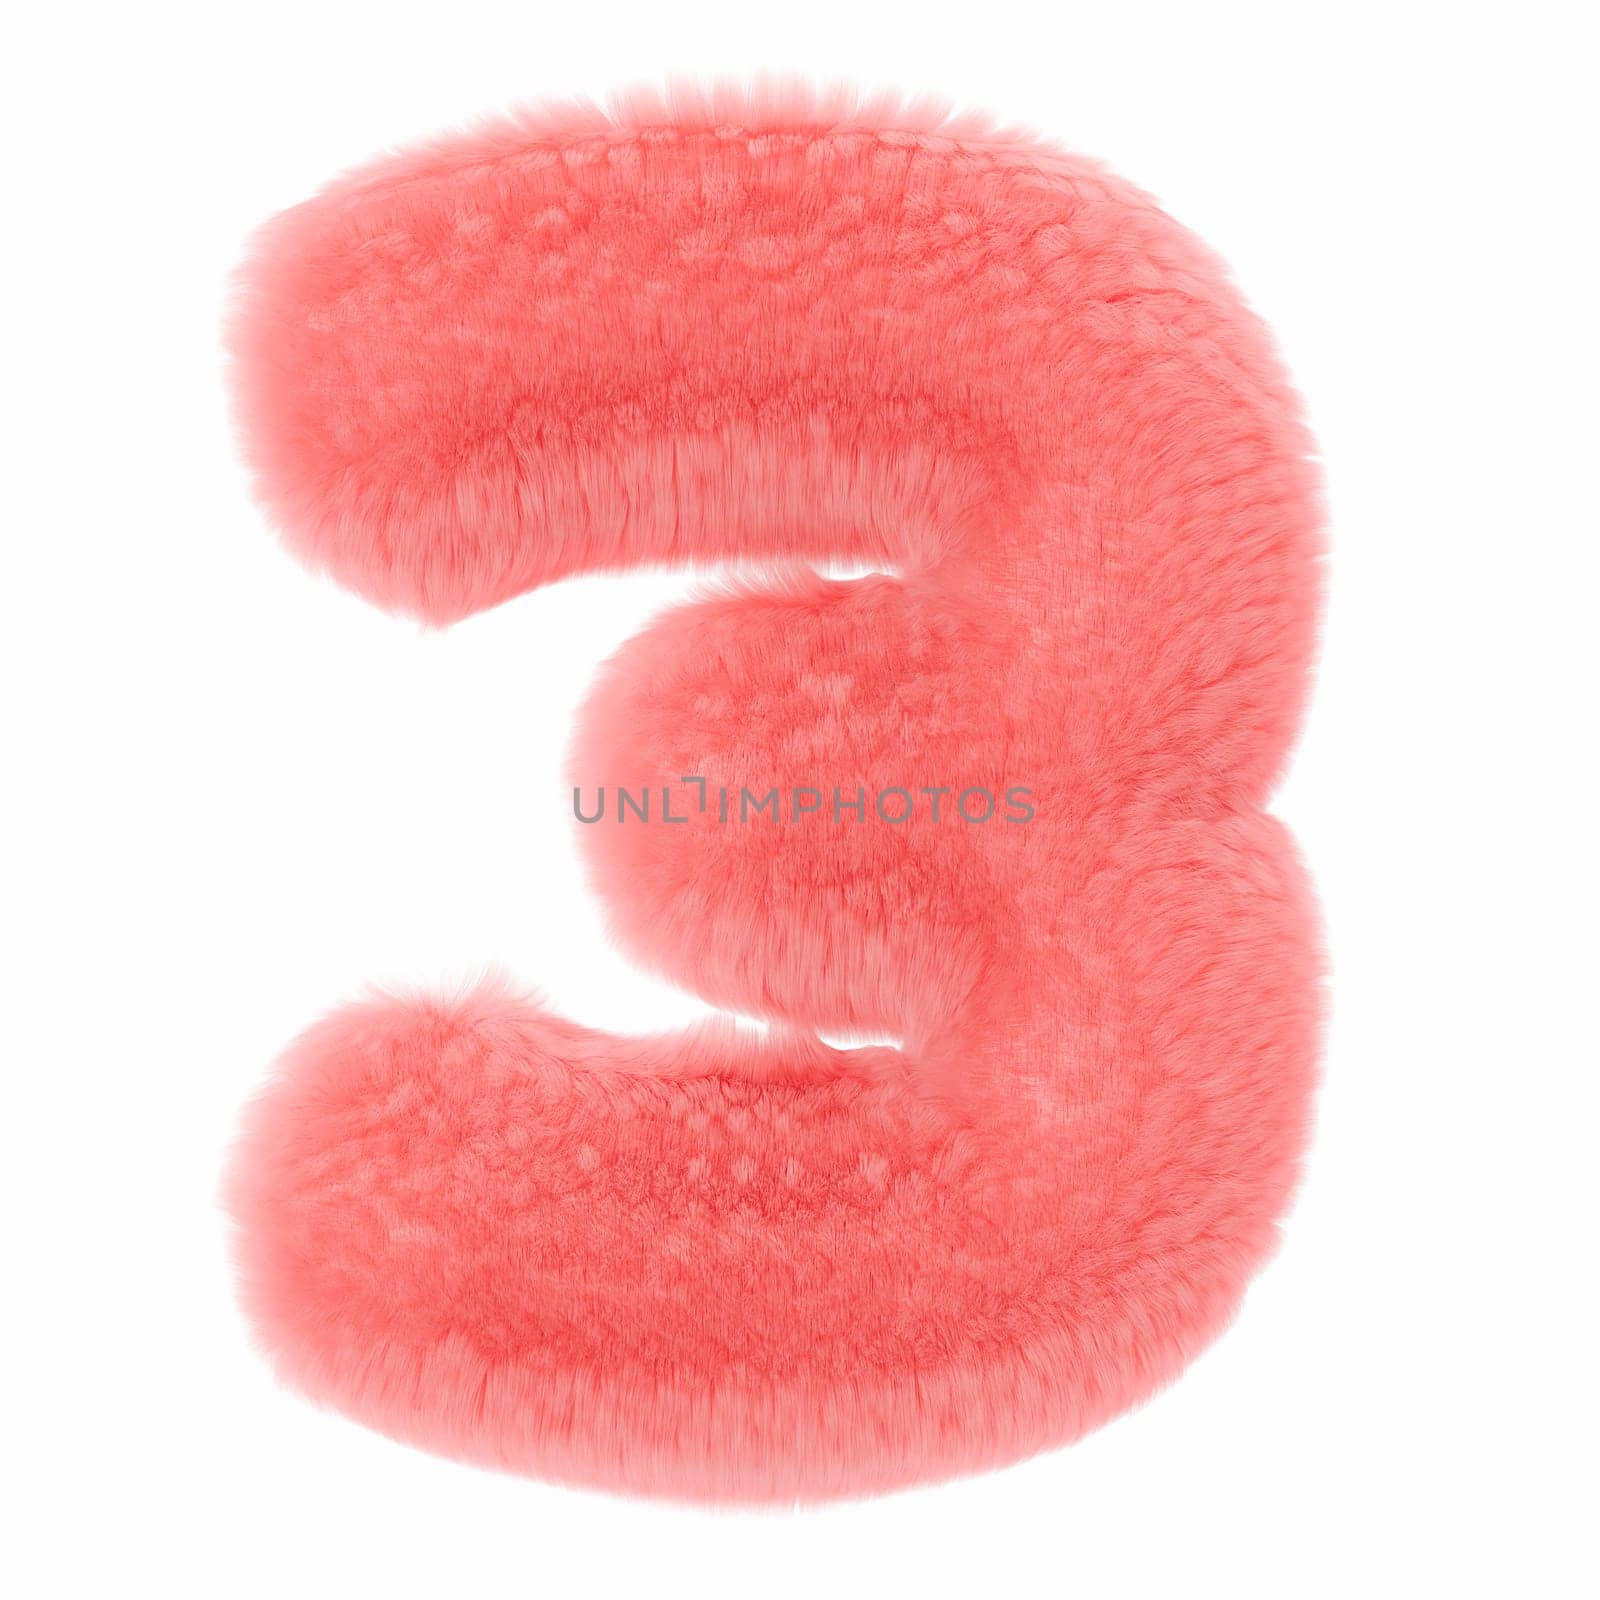 Pink and fluffy 3D number three, isolated on white background. Furry, soft and hairy symbol 3. Trendy, cute design element. Cut out object. 3D rendering